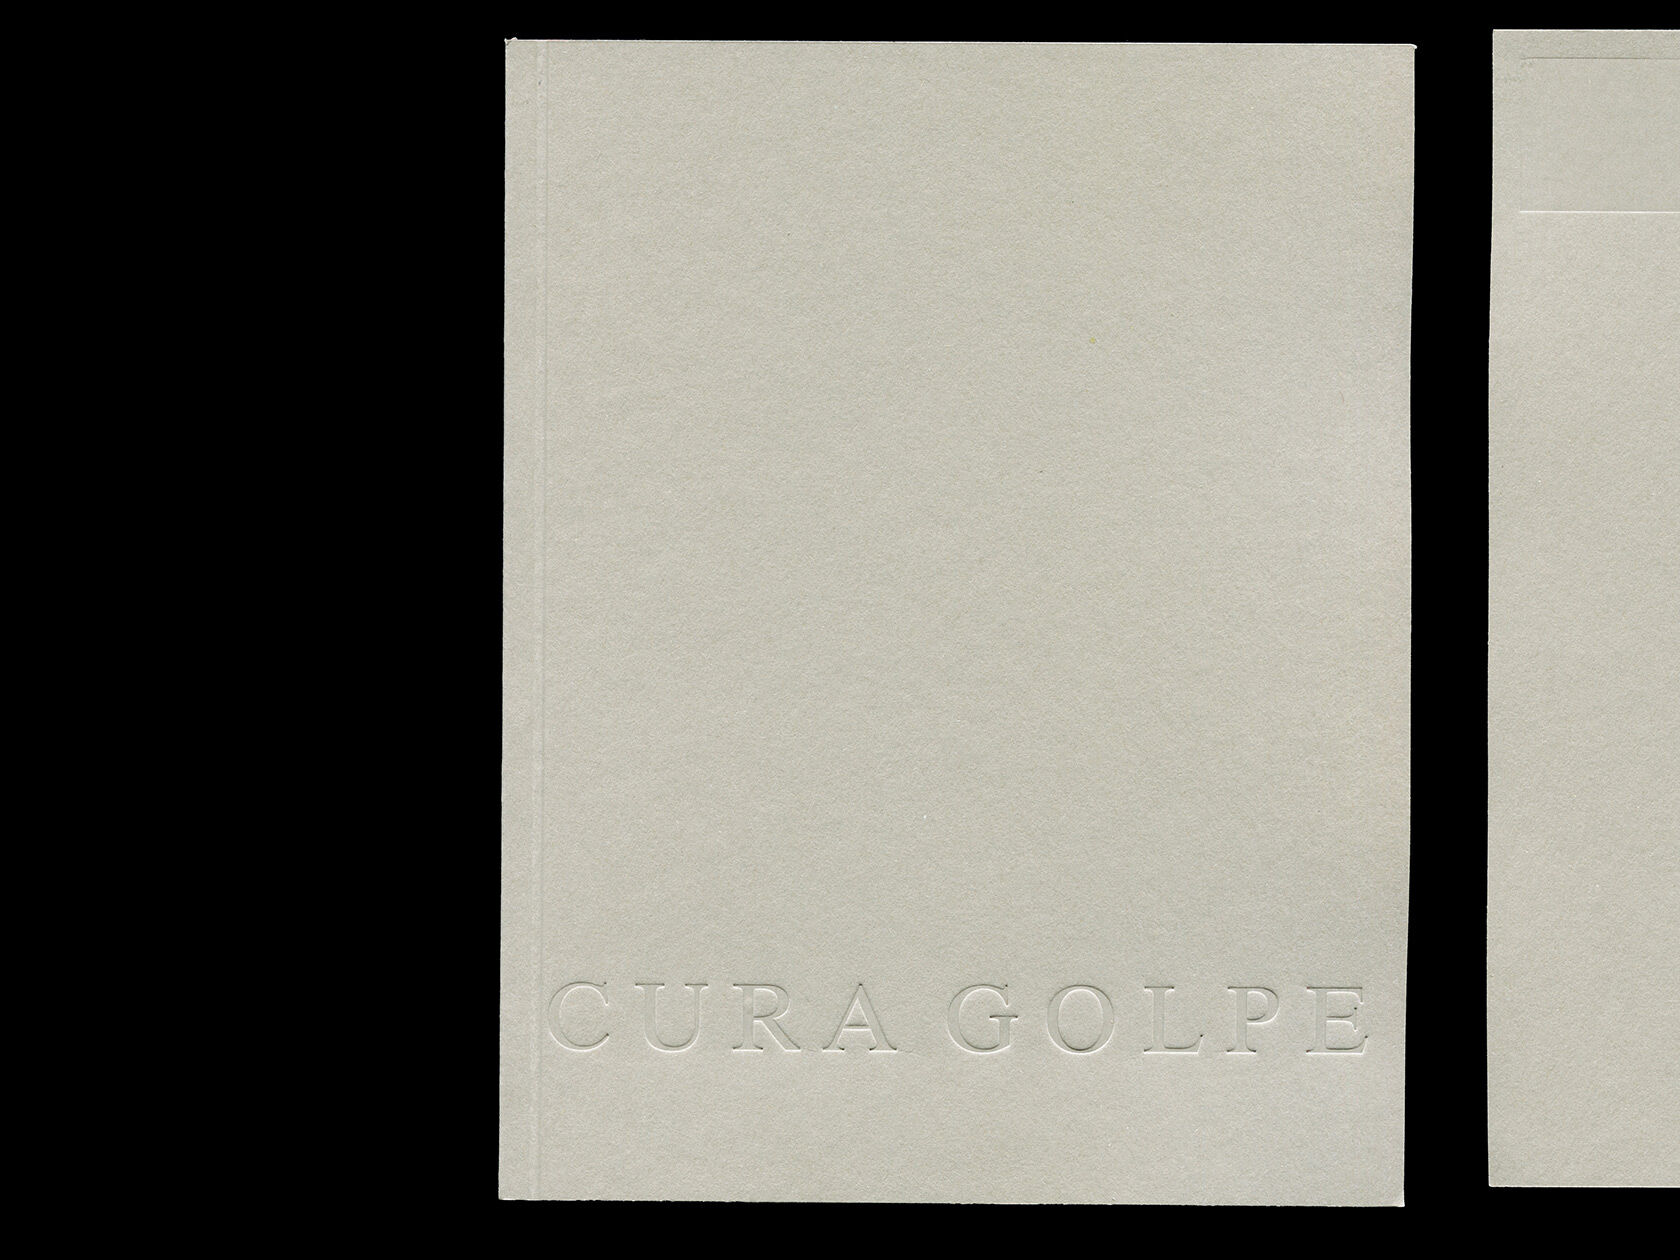 Designed by Max Schropp, the book “Cura Golpe” offers an in-depth look into the creative process of artist Edgar Unger